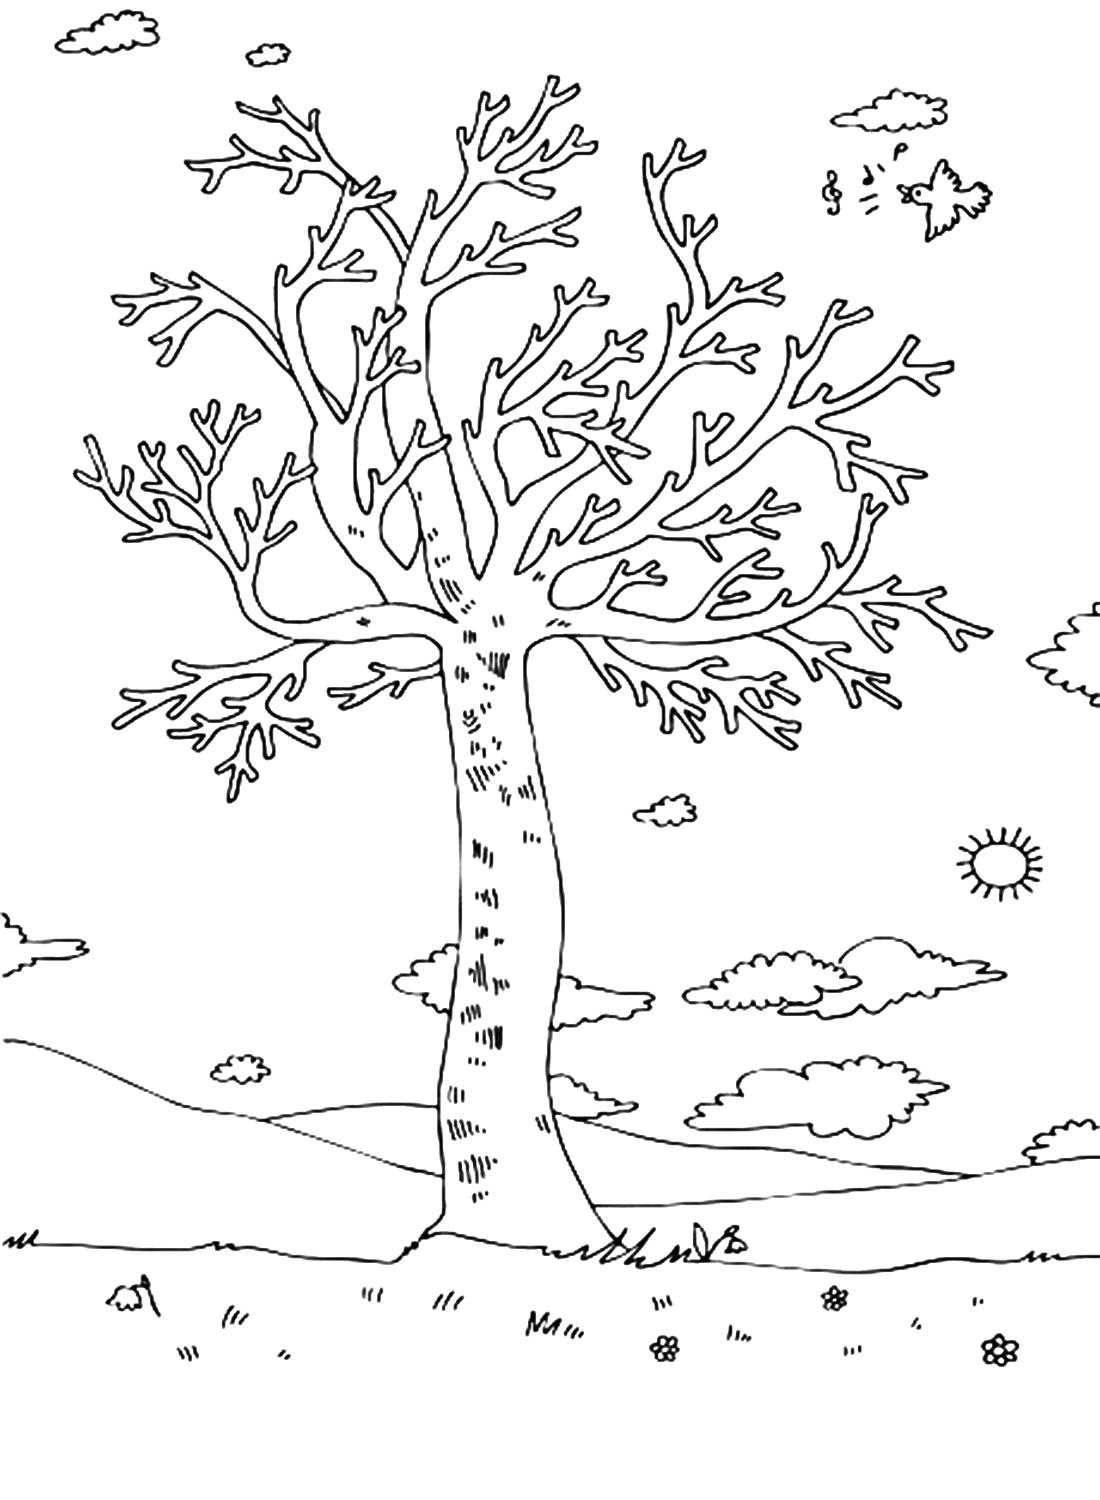 Spring Tree With Leaves And Blossoms Coloring Page